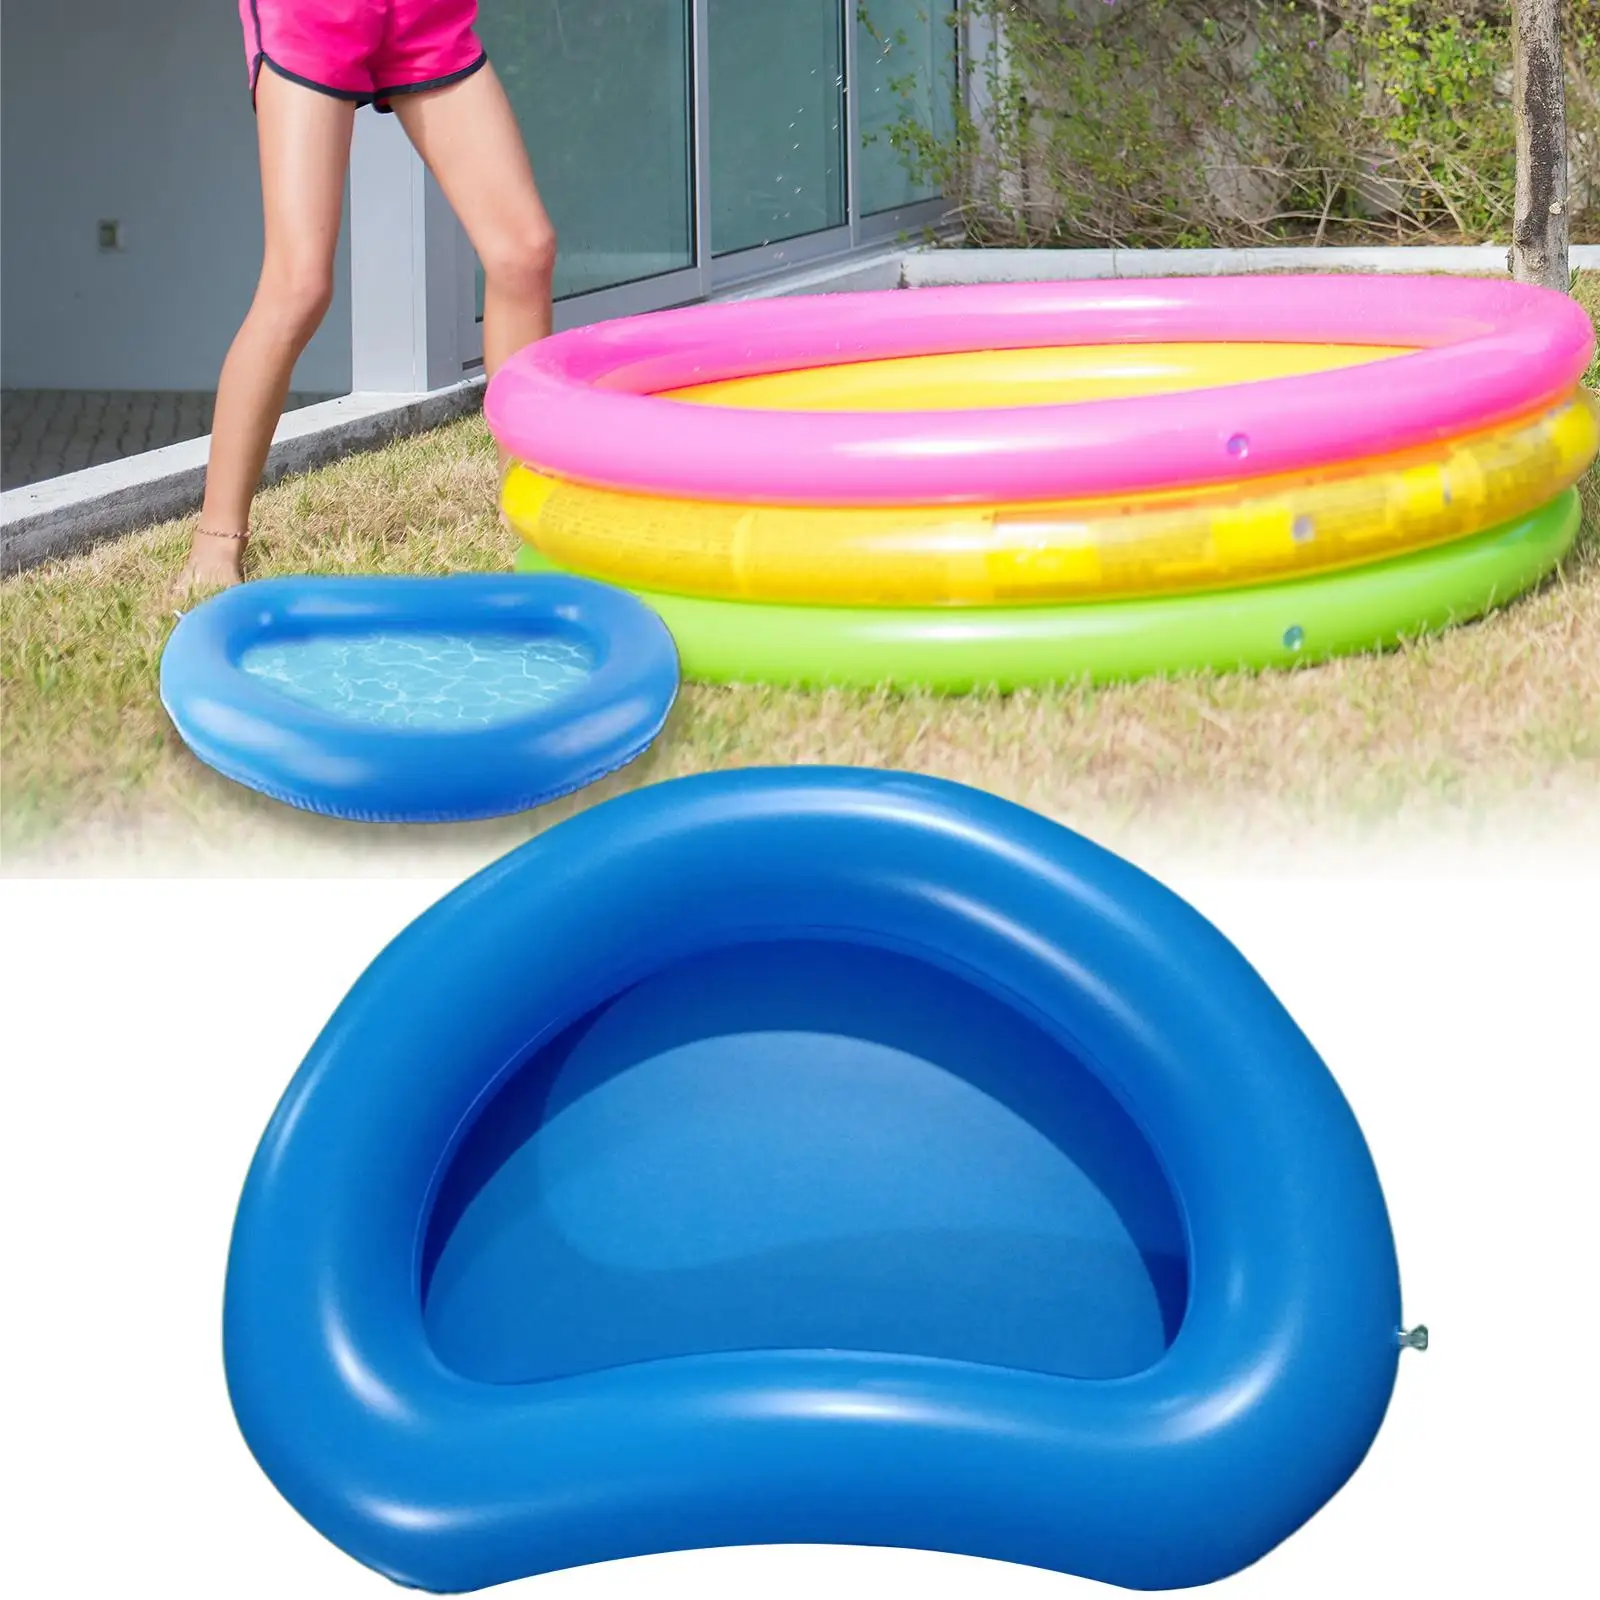 Inflatable Foot Bath Footbath Foot Soaking Bath Basin for Beach, Camping, and Outdoors to Clean Feet PVC Material Multipurpose